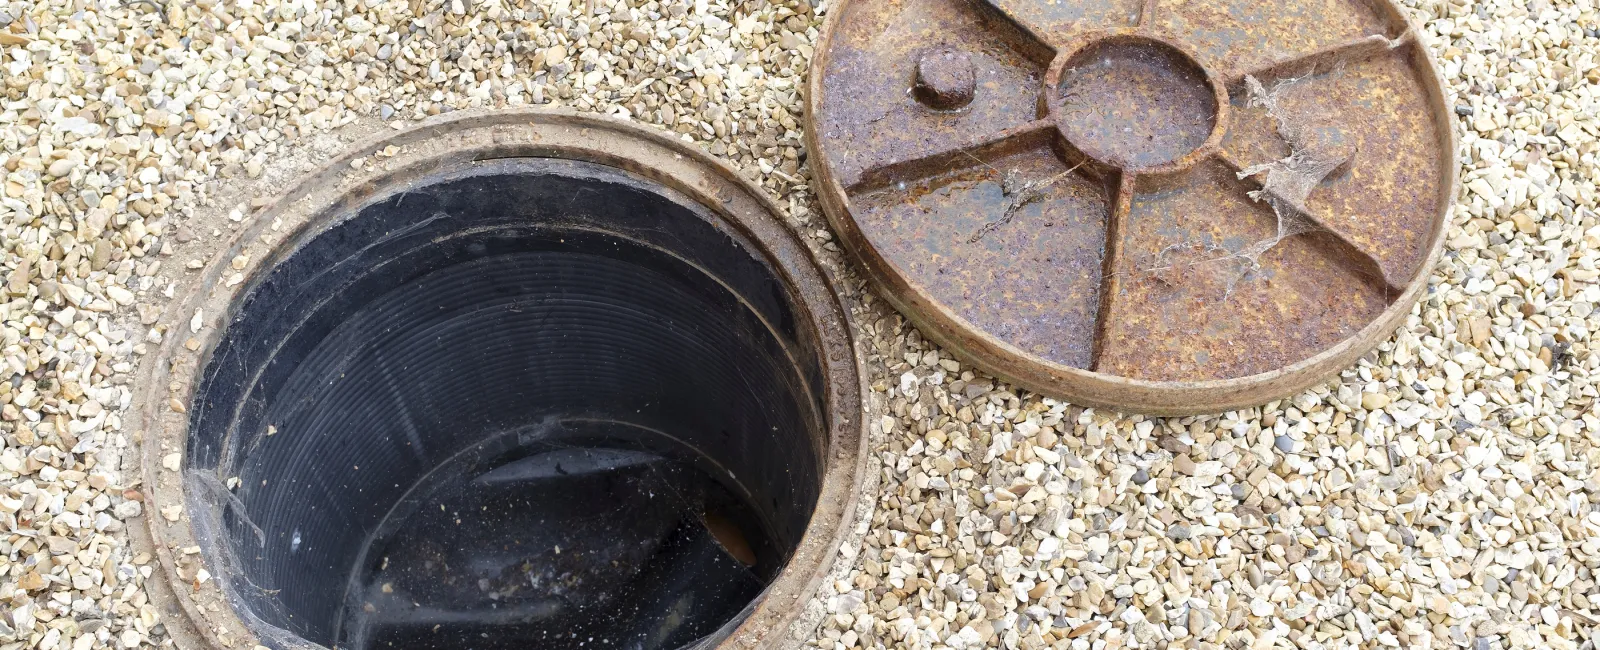 Why Does My Sewer Keep Backing up, and What Can I Do About It?